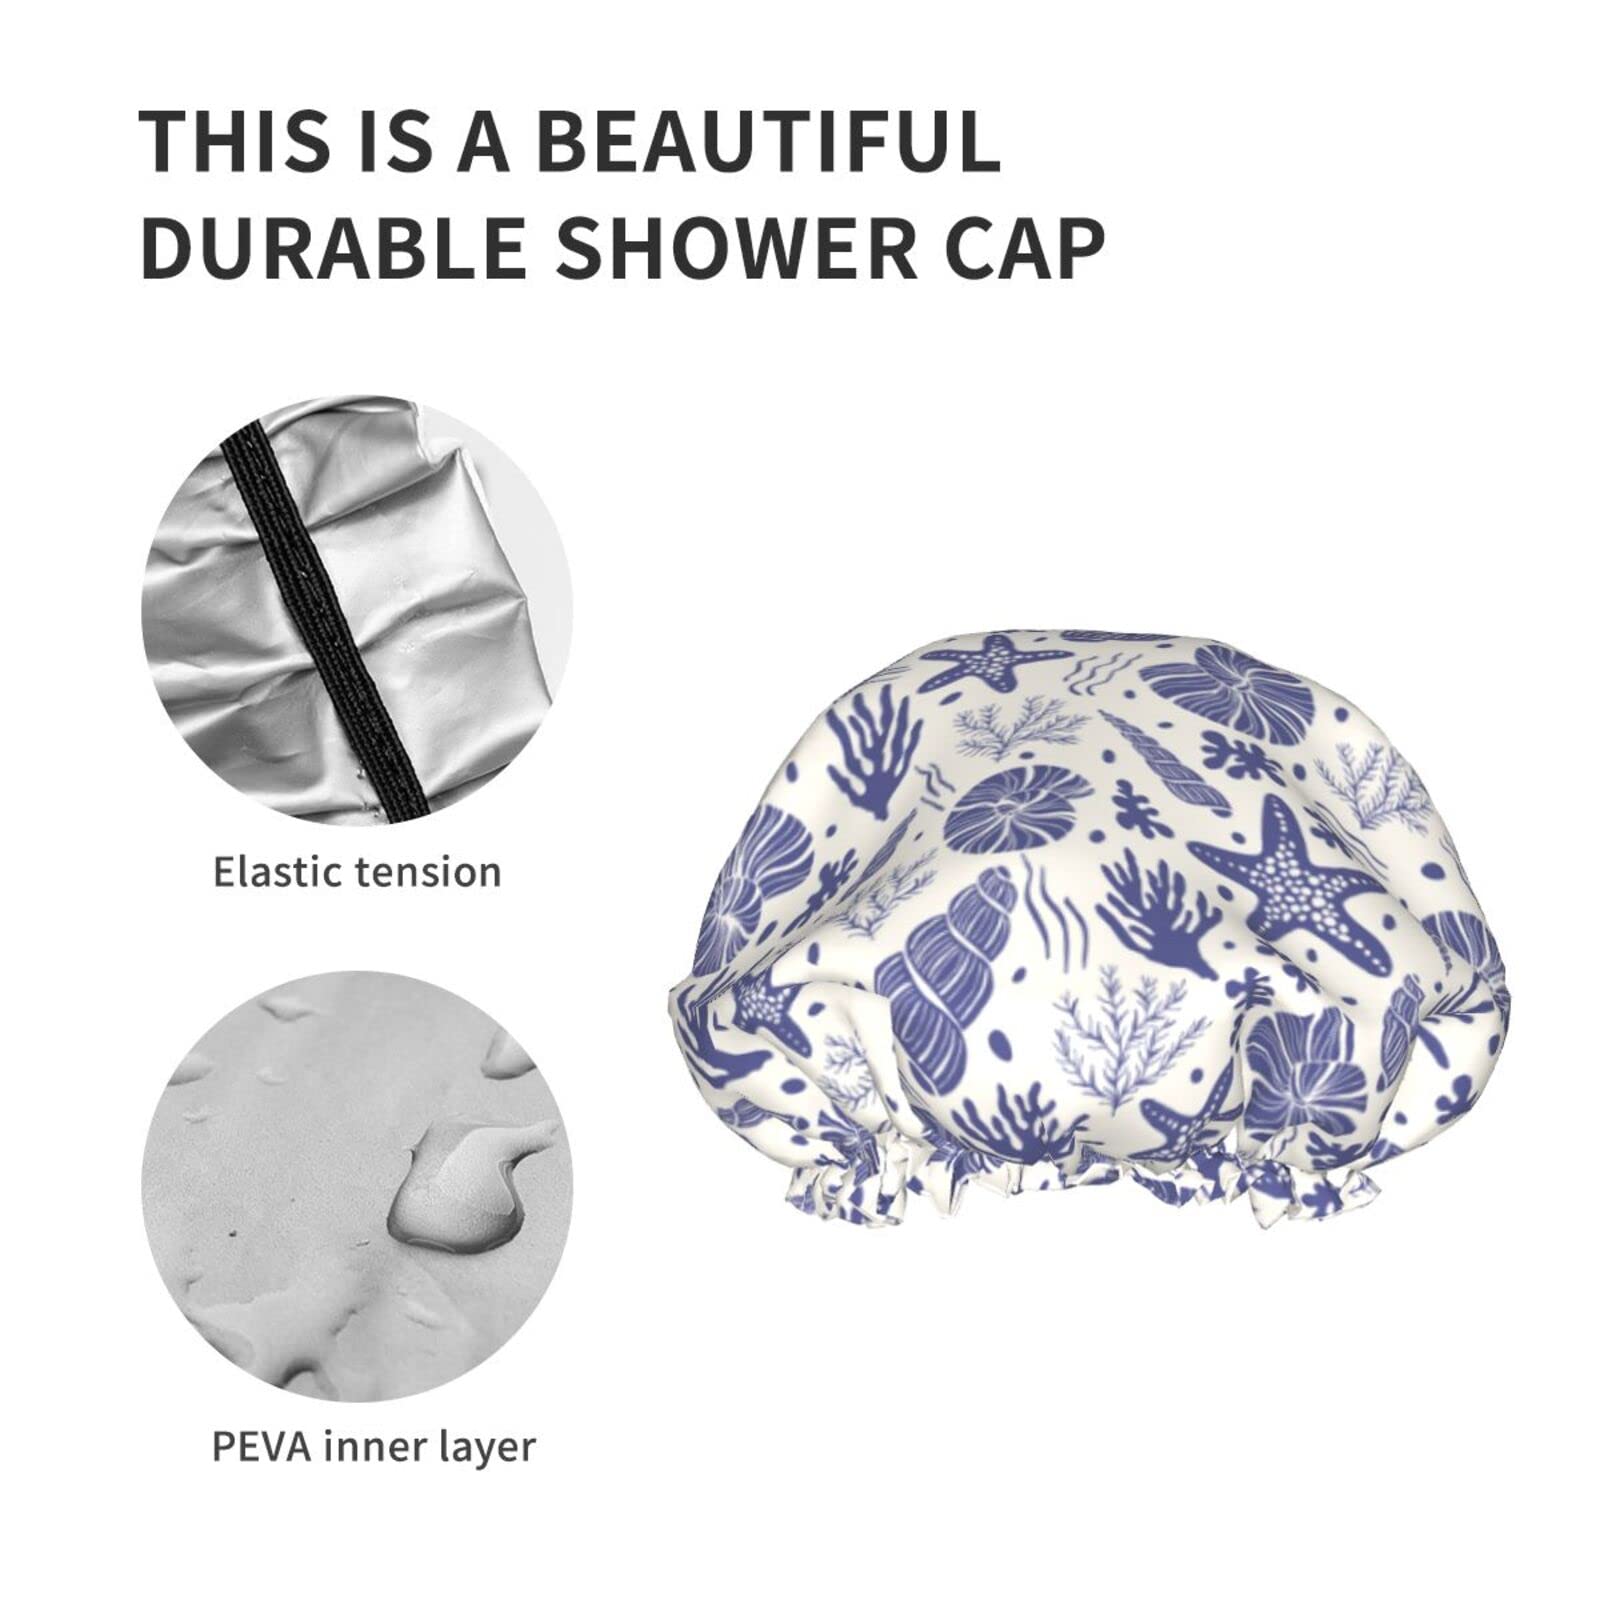 Seashore Elements Reusable Double Waterproof Shower Cap & Bath Cap,Lined,Oversized Waterproof Shower Caps Large Designed for All Hair Lengths with PEVA Lining & Elastic Band Stretch Hem Hair Hat For Women